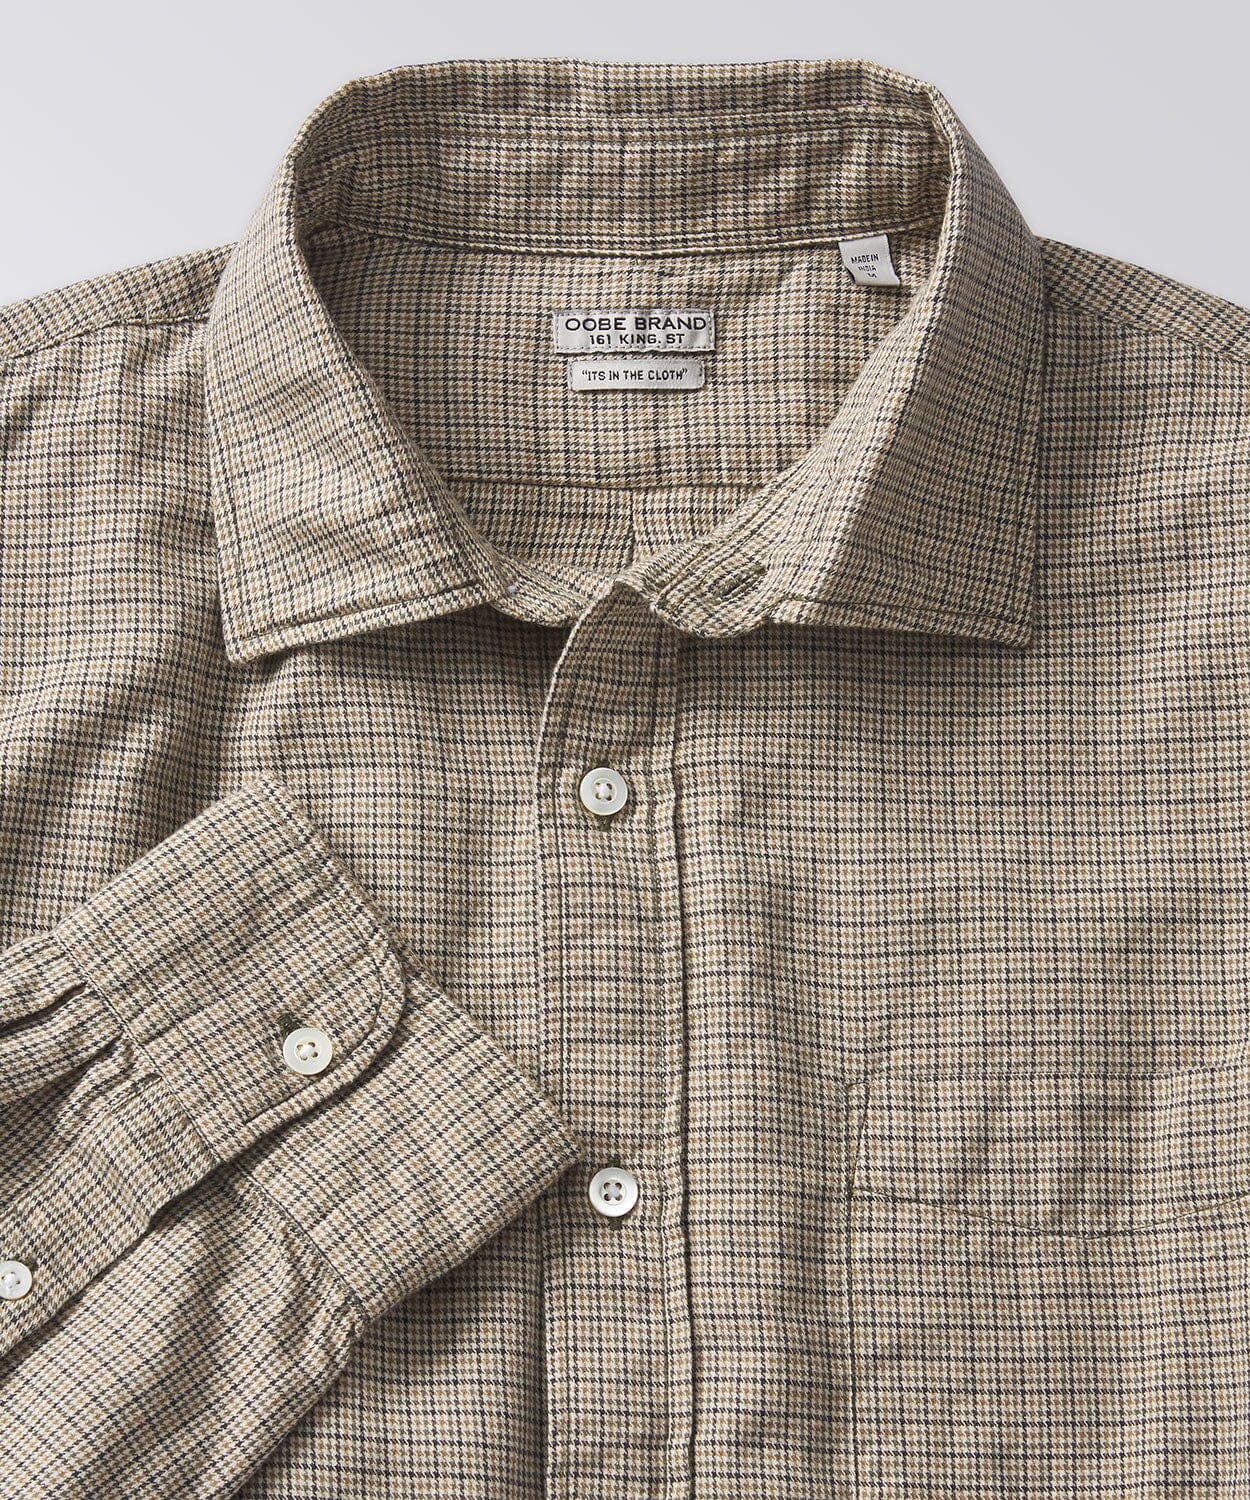 Excella Brushed Heather Plaid Shirt